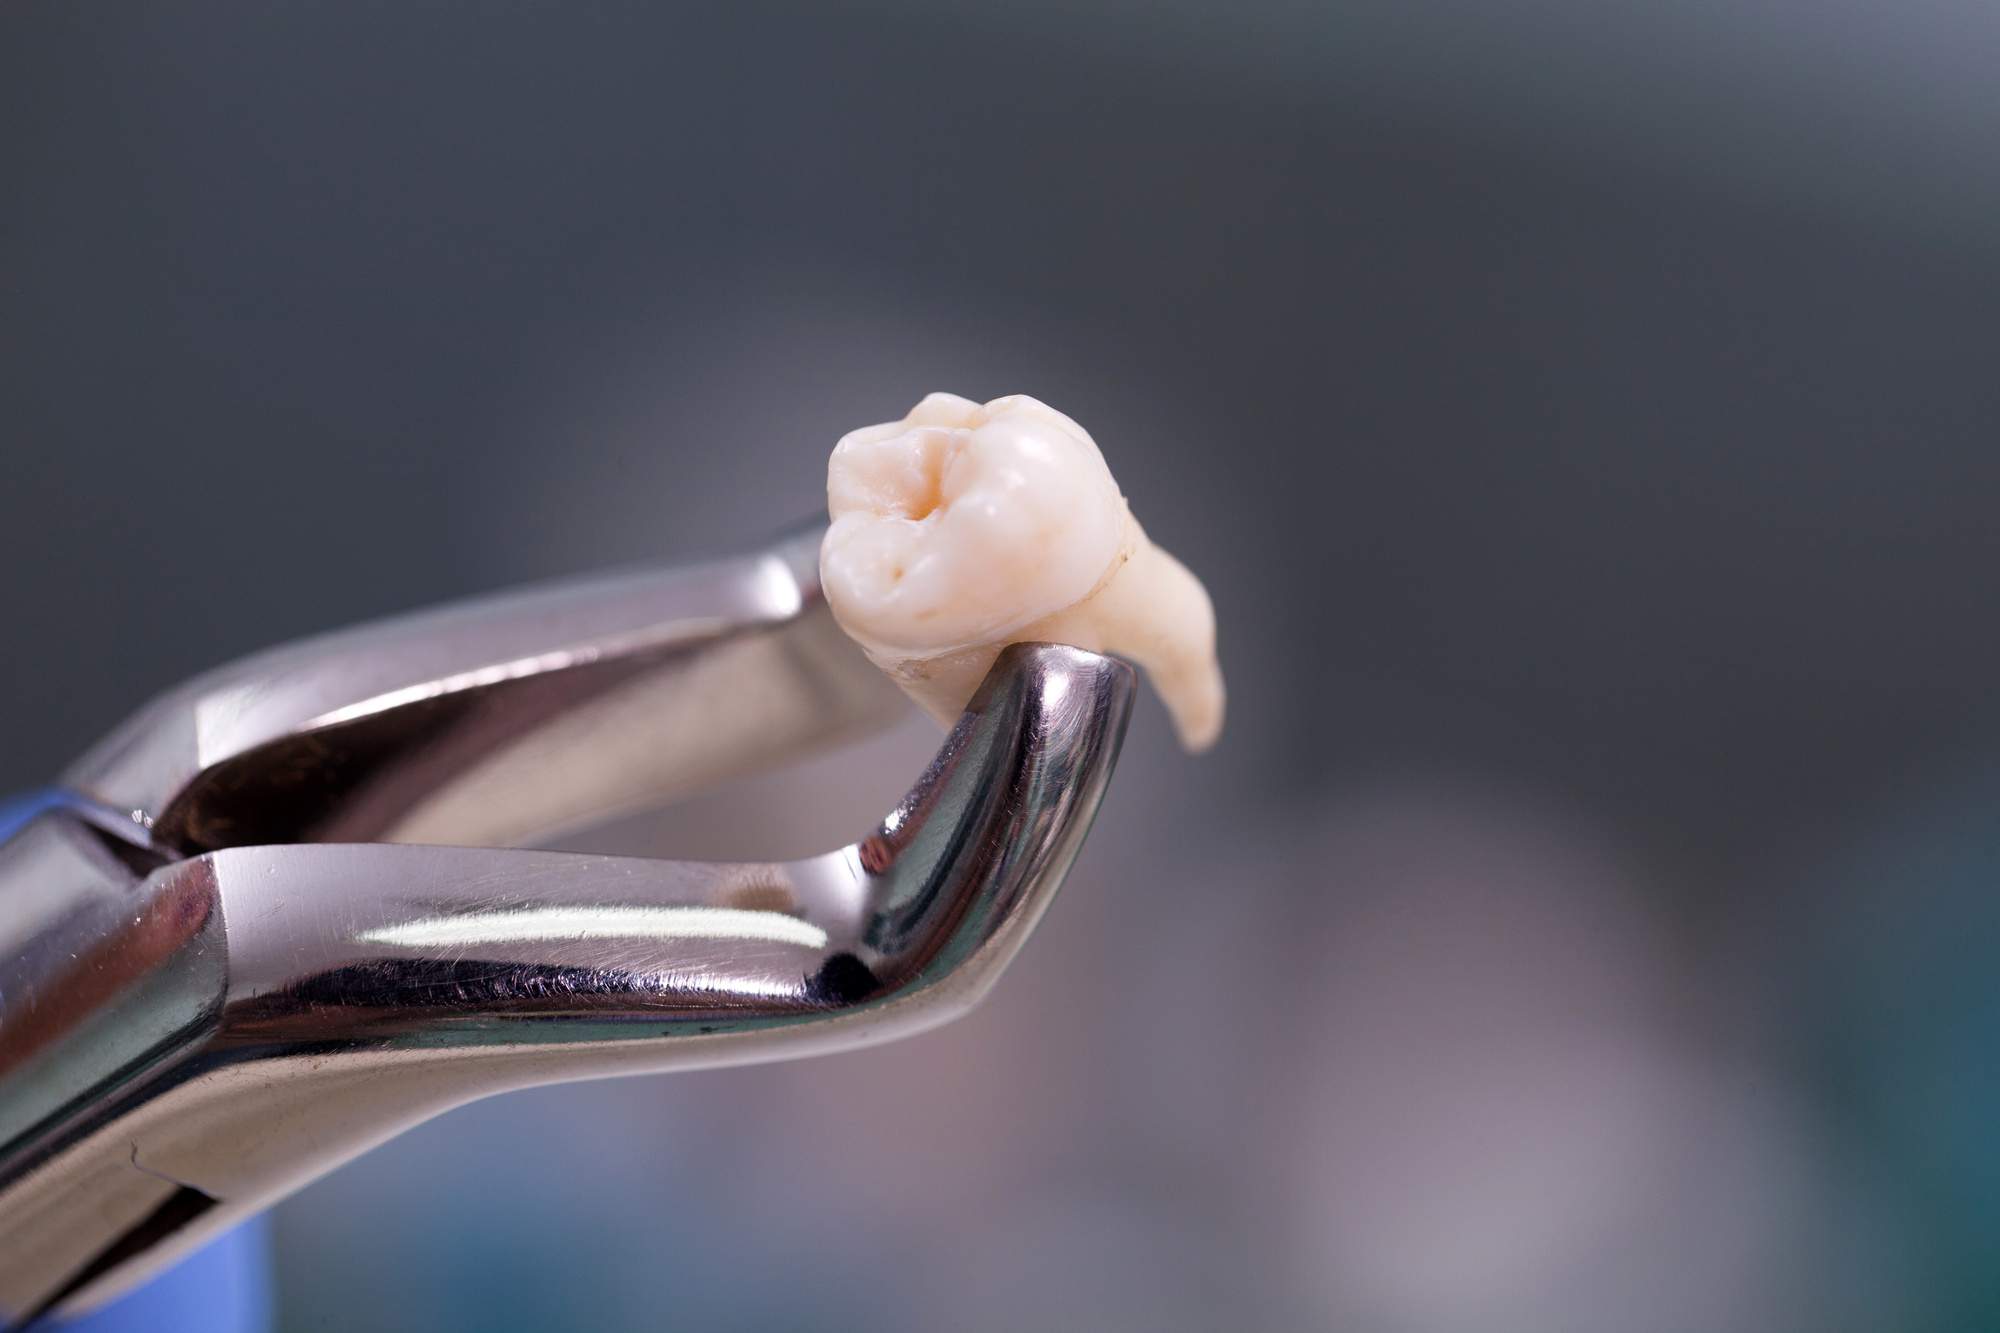 5 Options for Replacing Missing Teeth